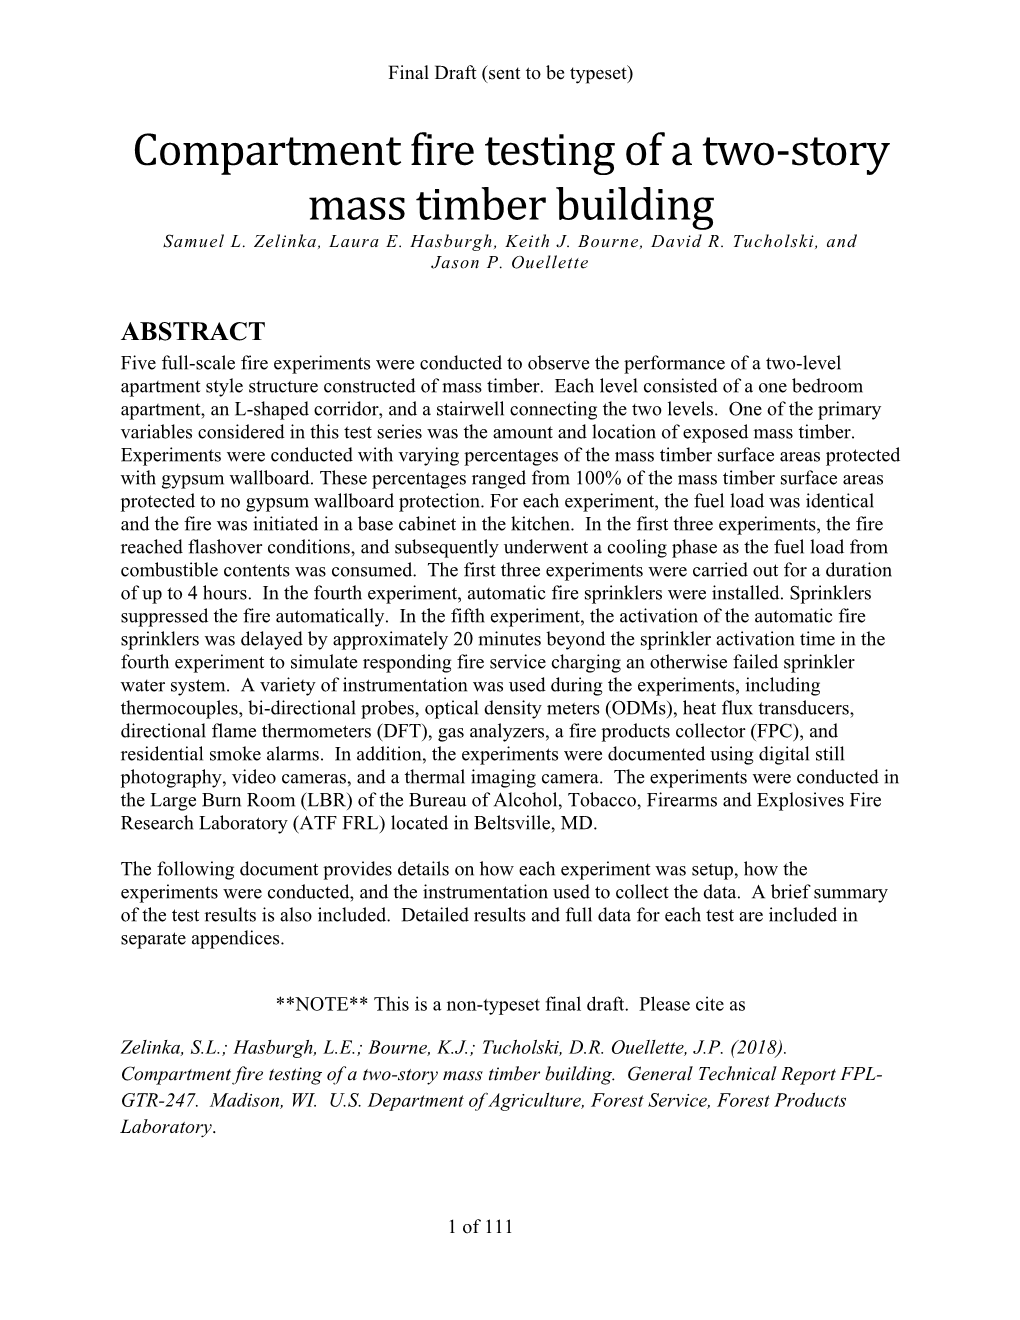 Compartment Fire Testing of a Two‐Story Mass Timber Building Samuel L